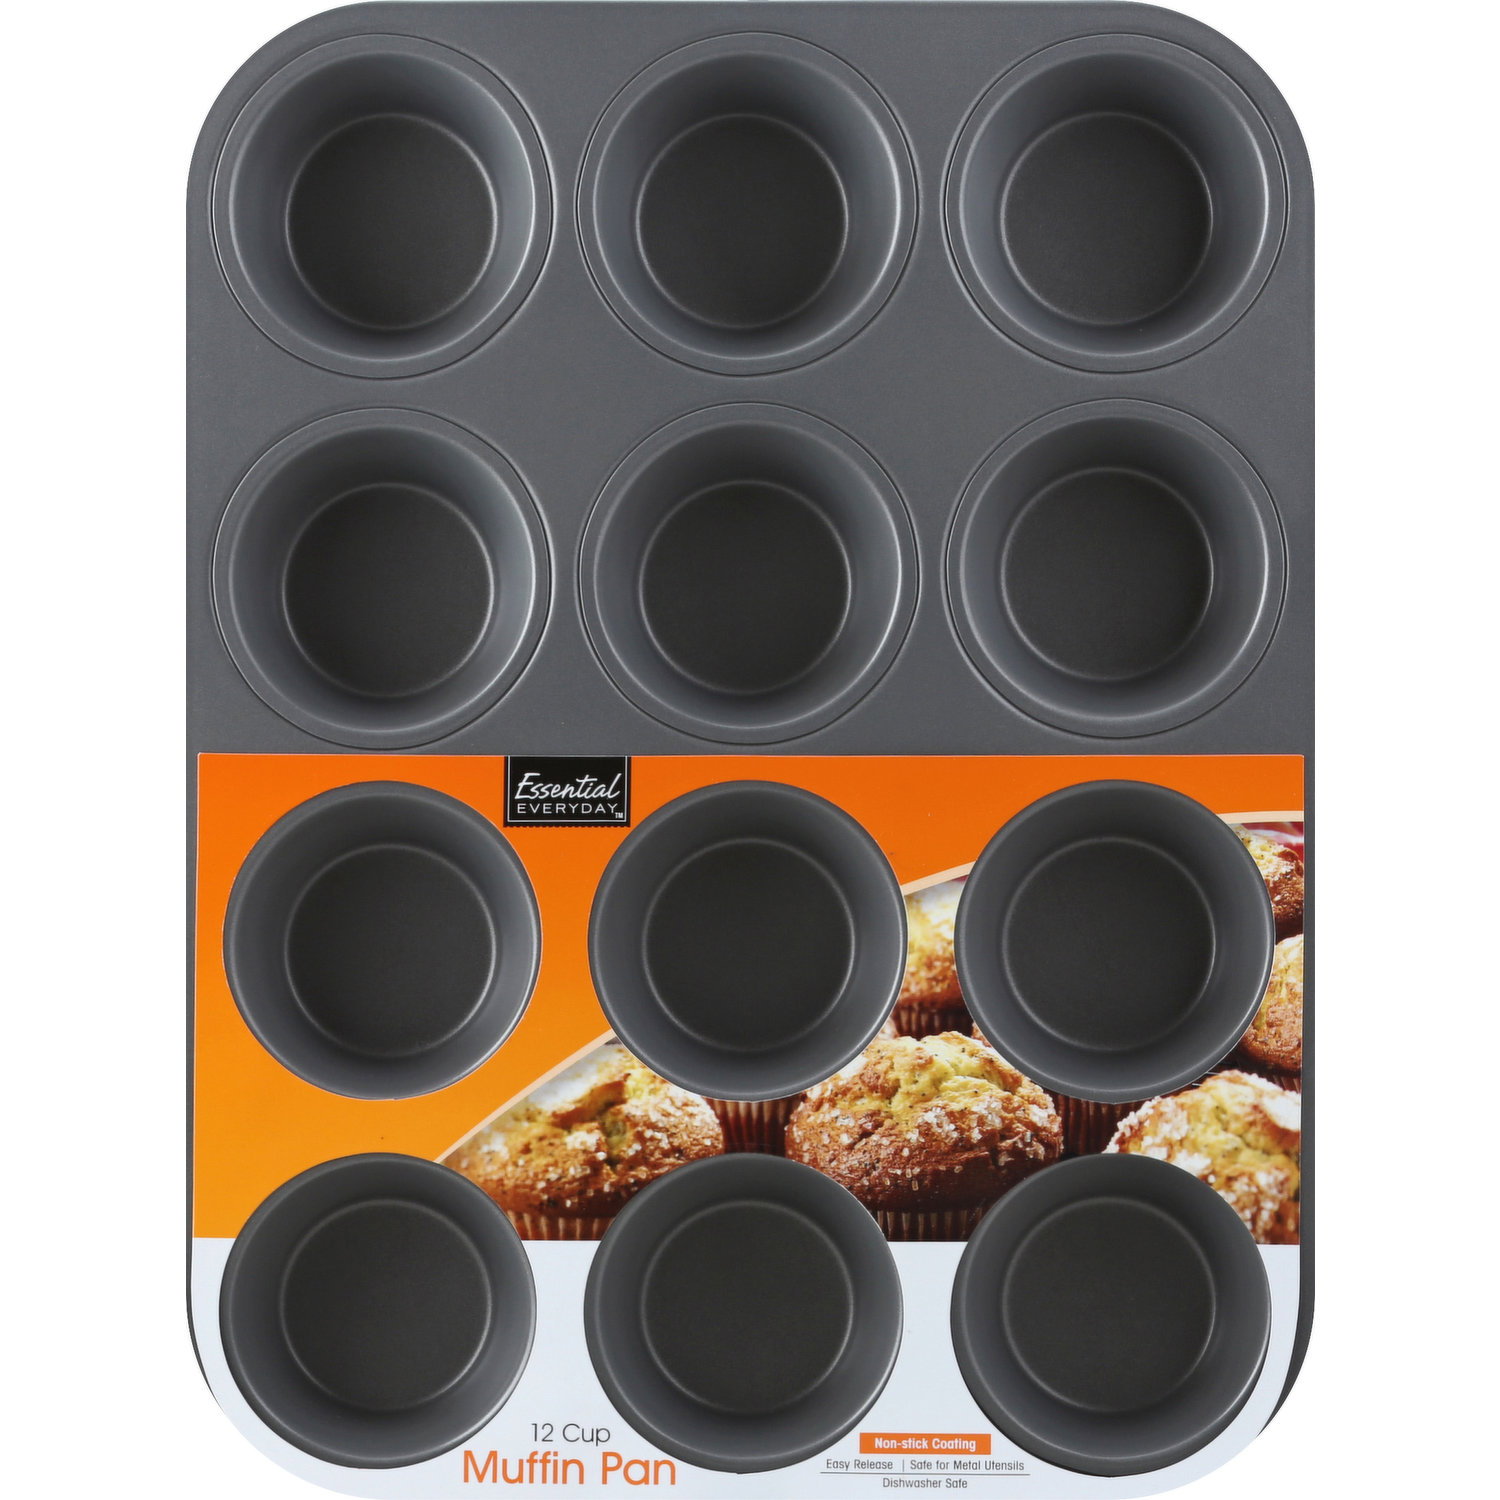 Baker's Secret Essential Toaster Oven Set: 6 Cup Muffin Pan